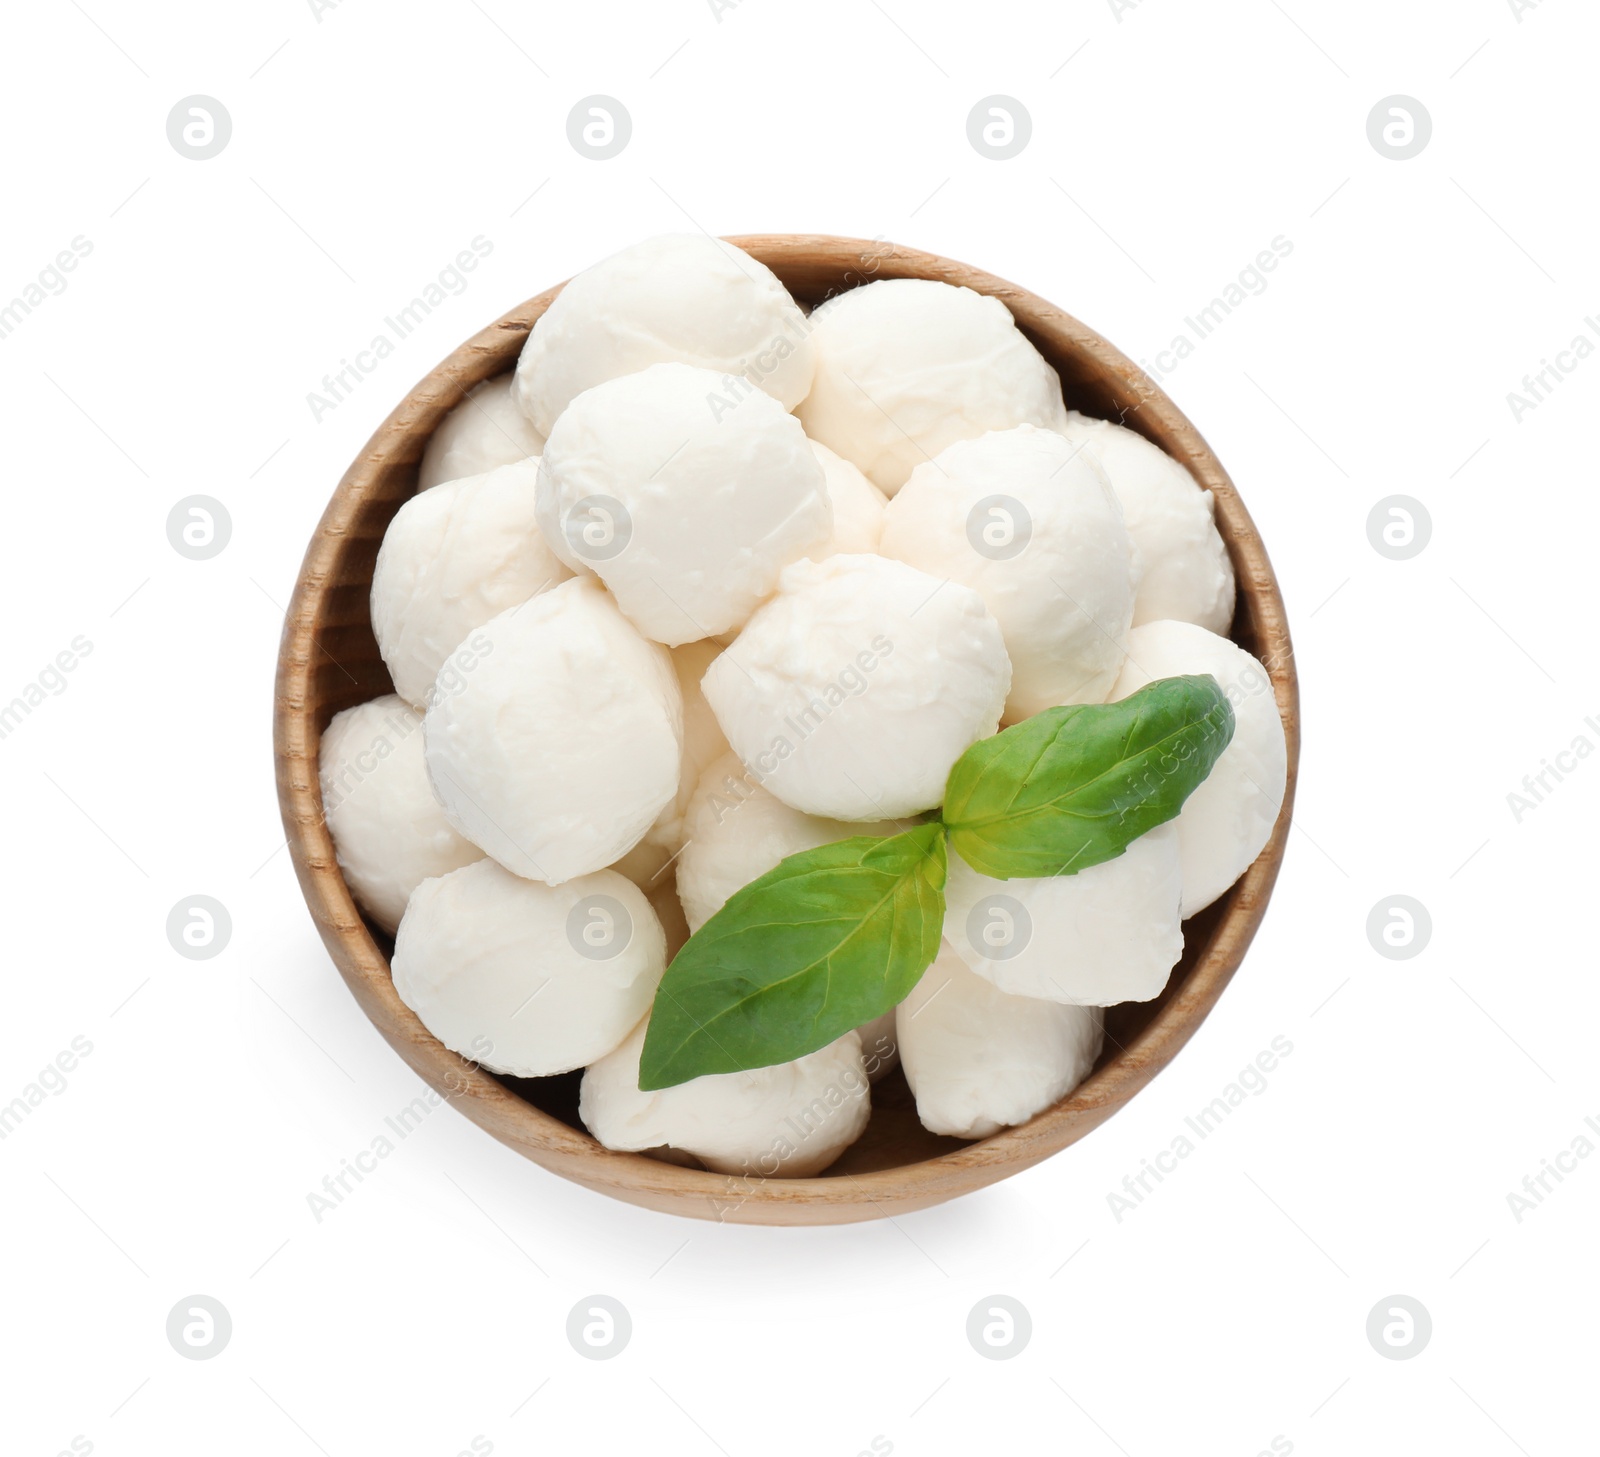 Photo of Wooden bowl with mozzarella cheese balls and basil on white background, top view